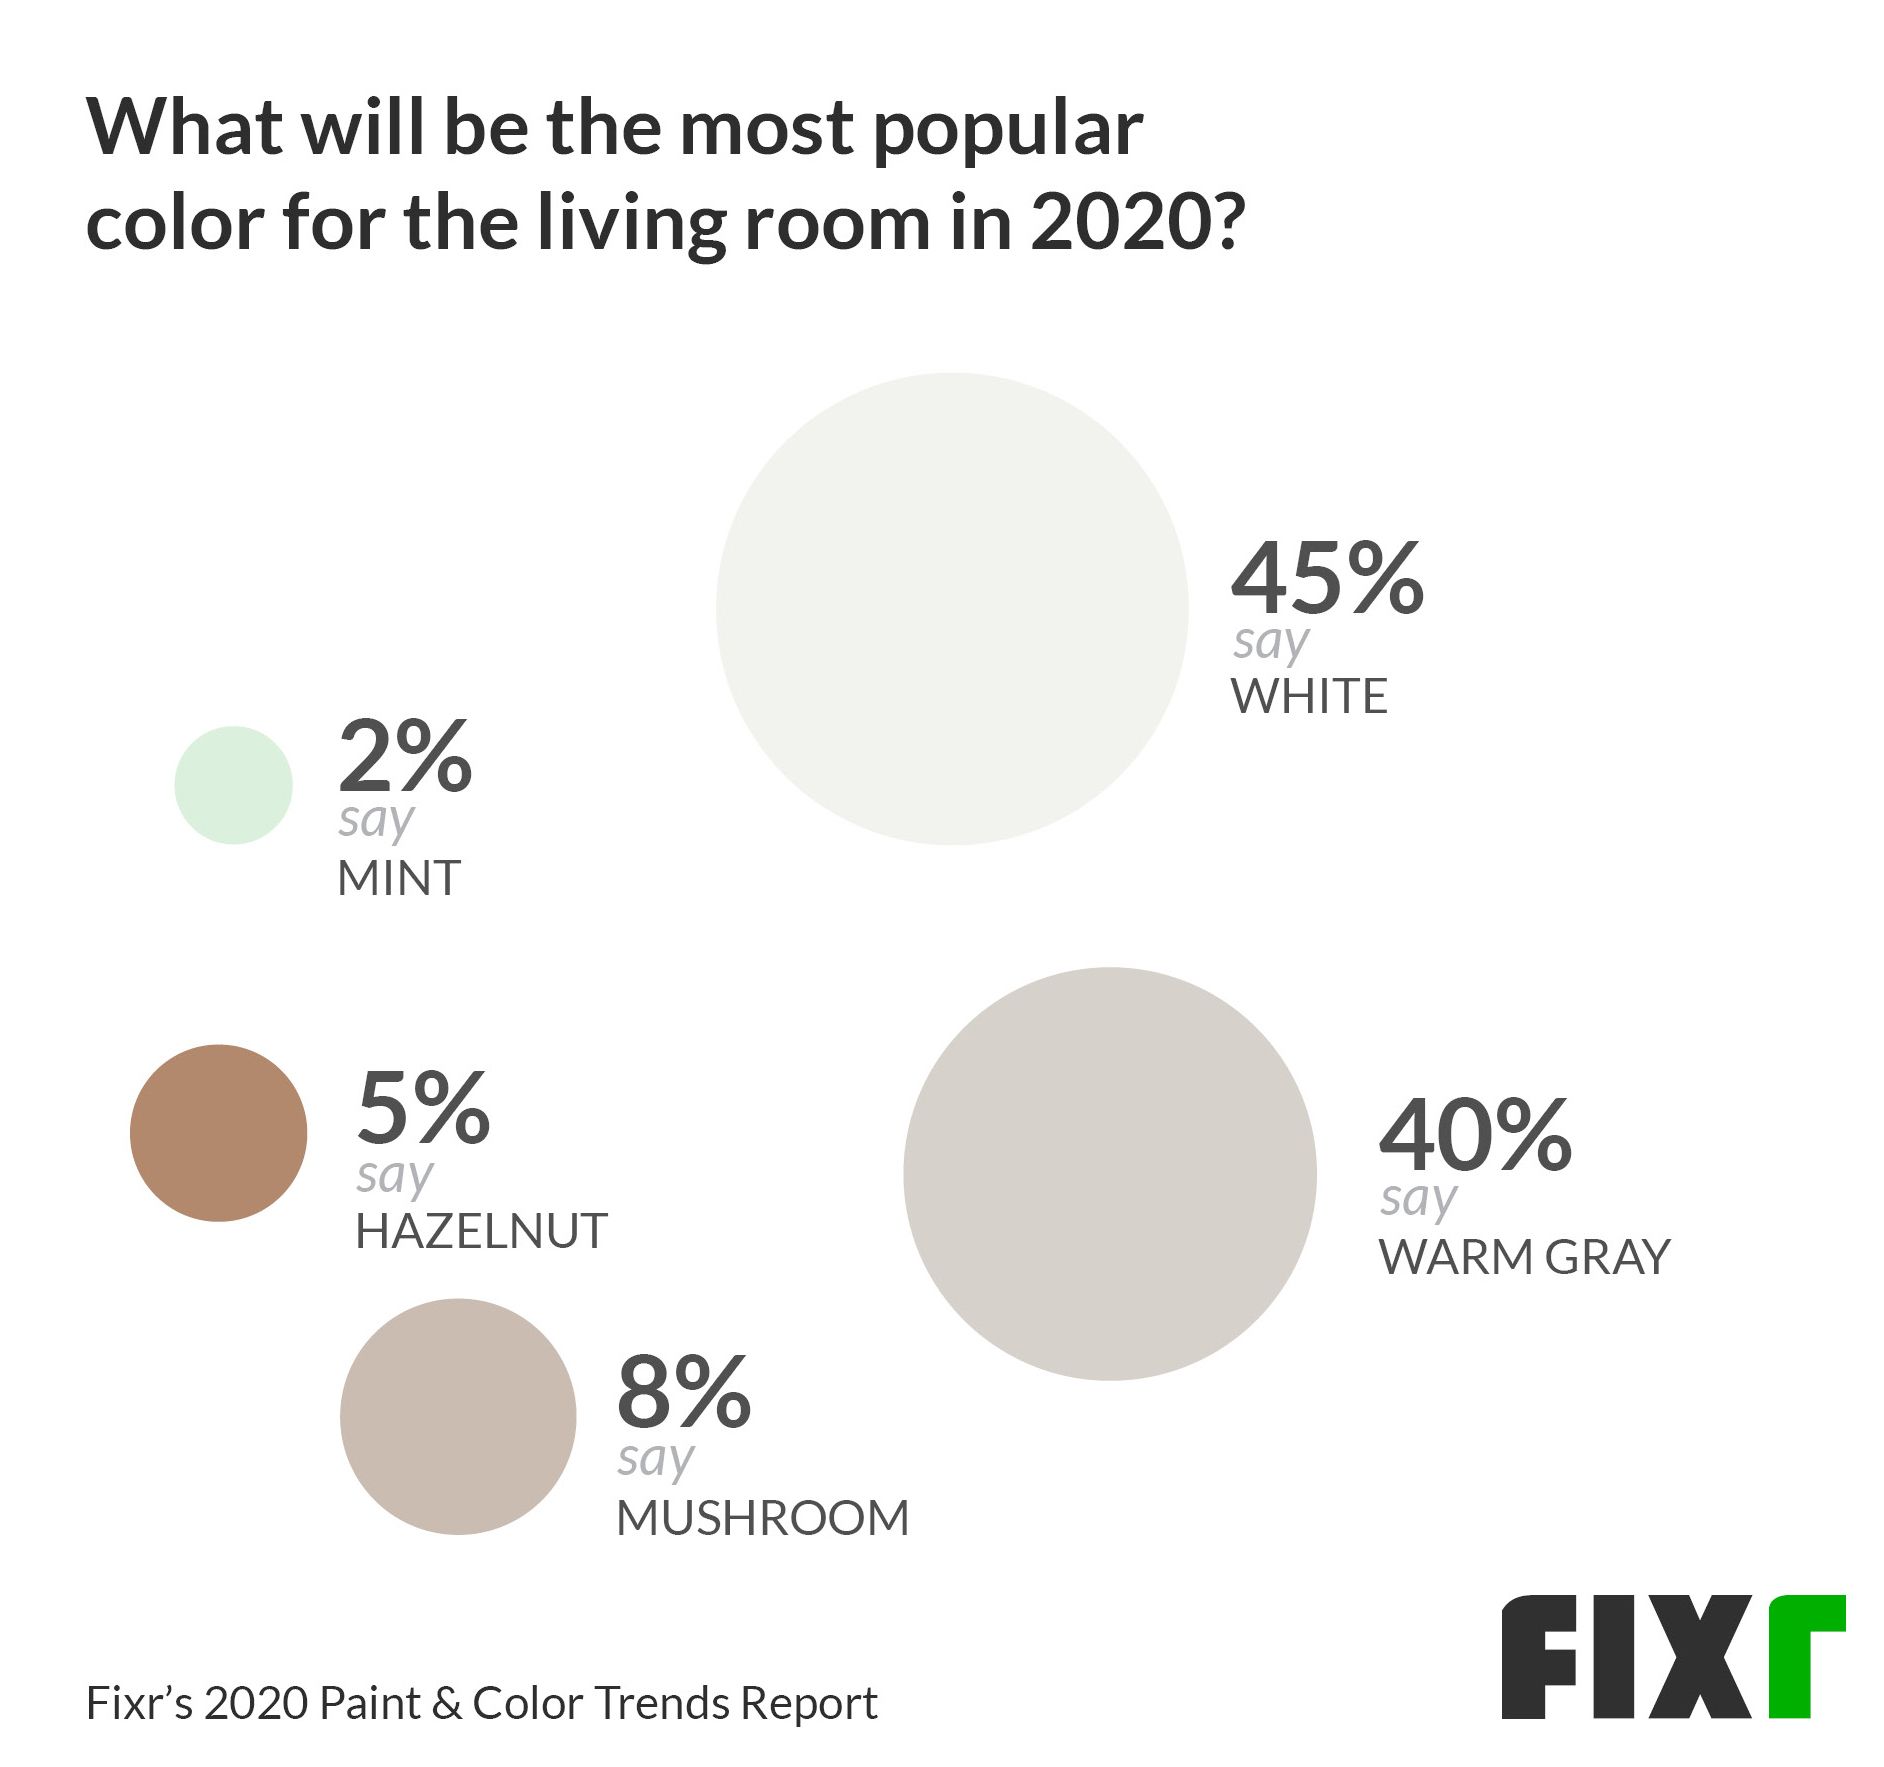 Paint And Color Trends 2020 Fixr, Neutral Paint Colors For Living Room 2020